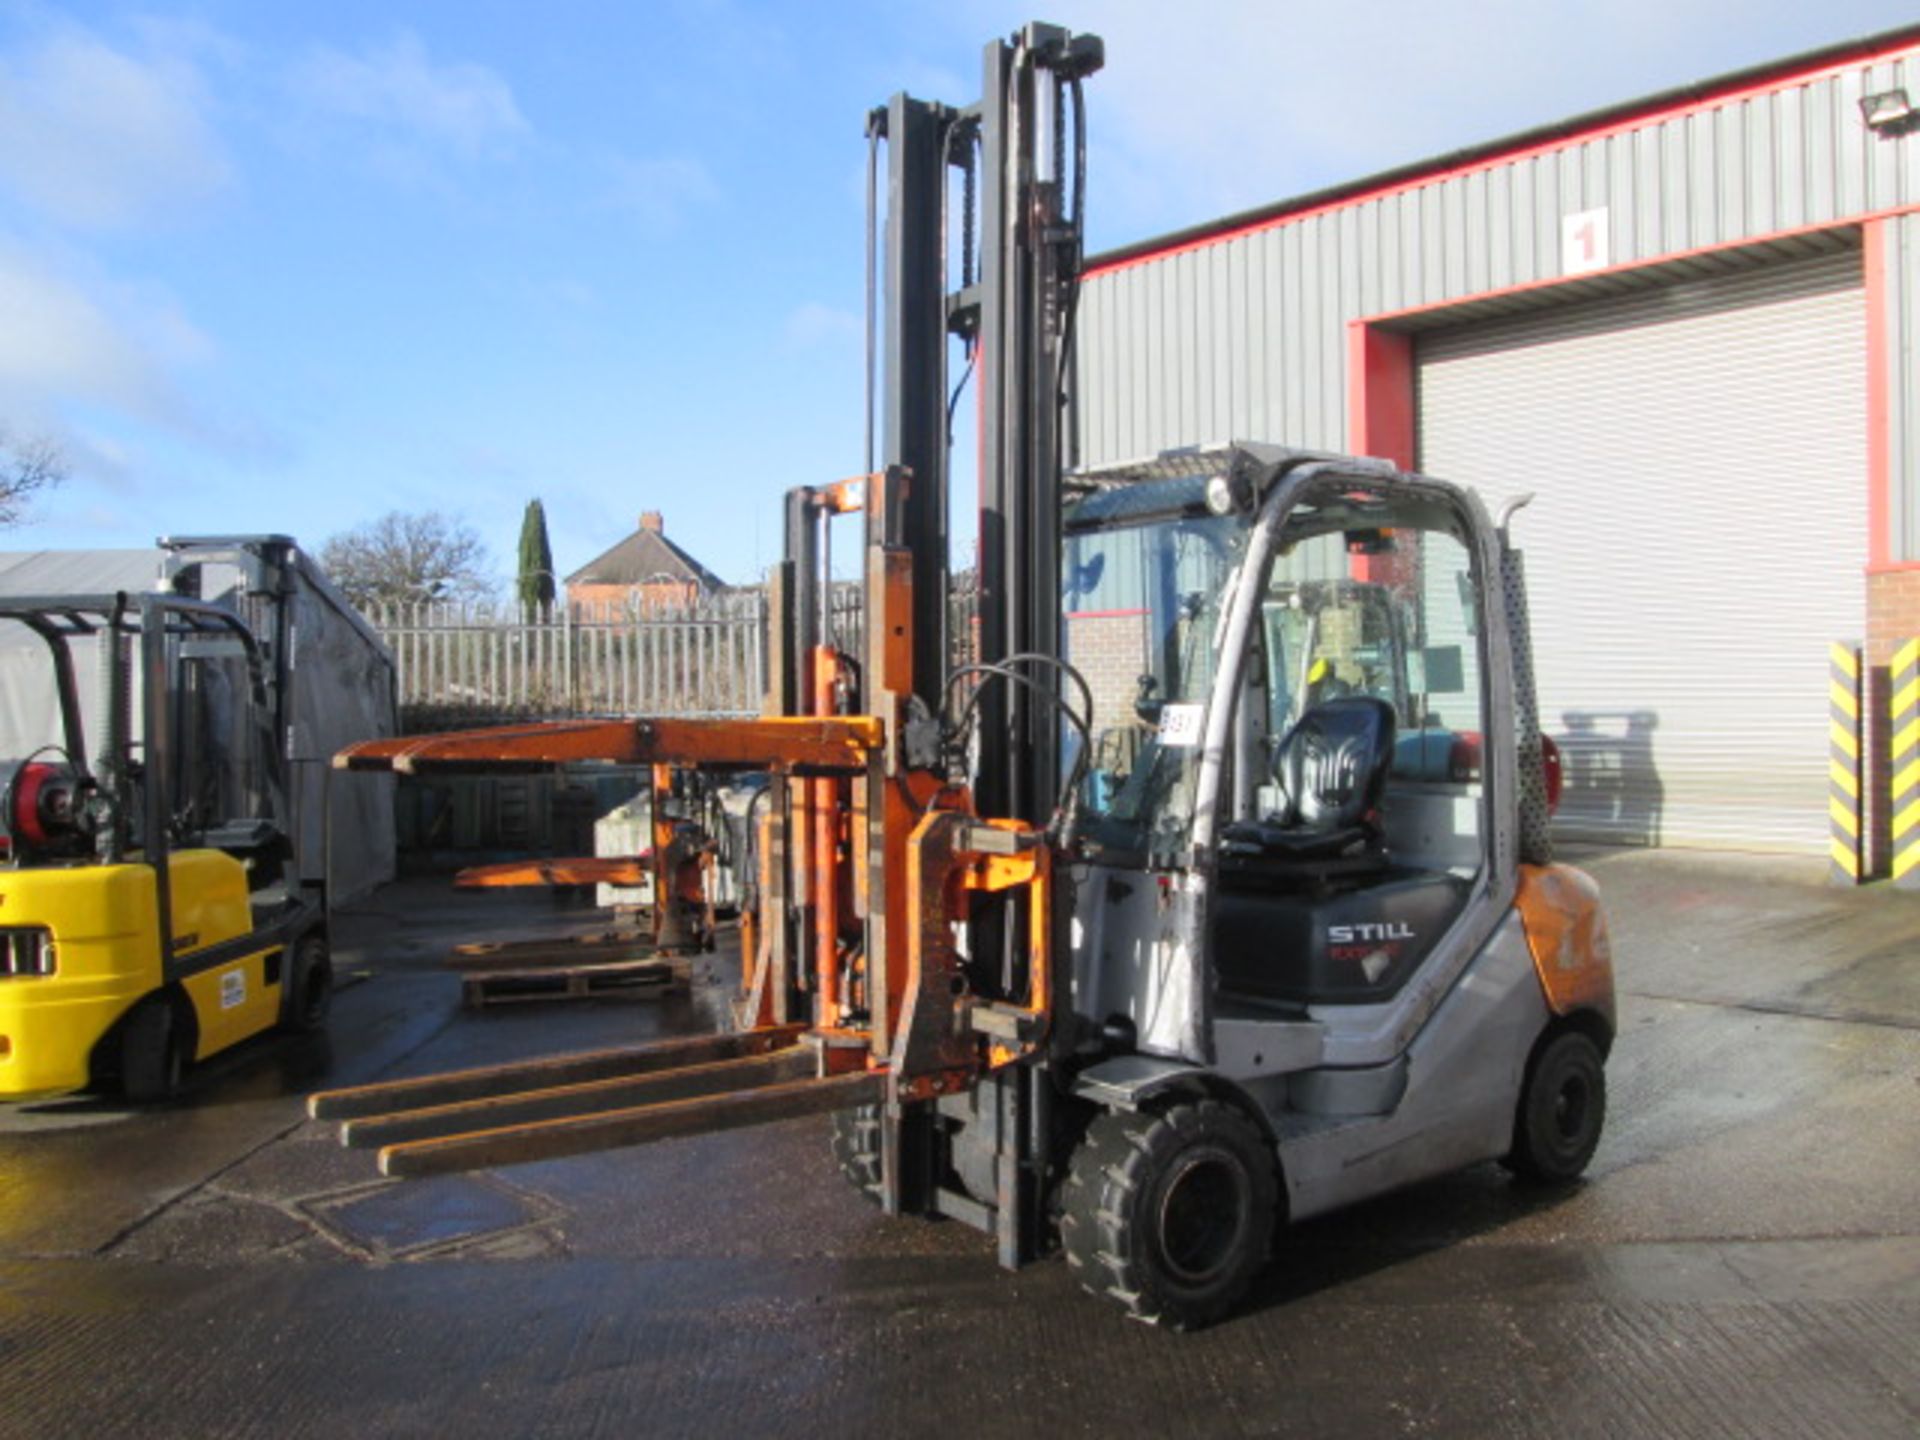 STILL RX70-30 LPG - VIN: 517327002276 - Year: 2008 - 10,993 Hours - Duplex Forklift, 3rd & 4th - Image 5 of 7